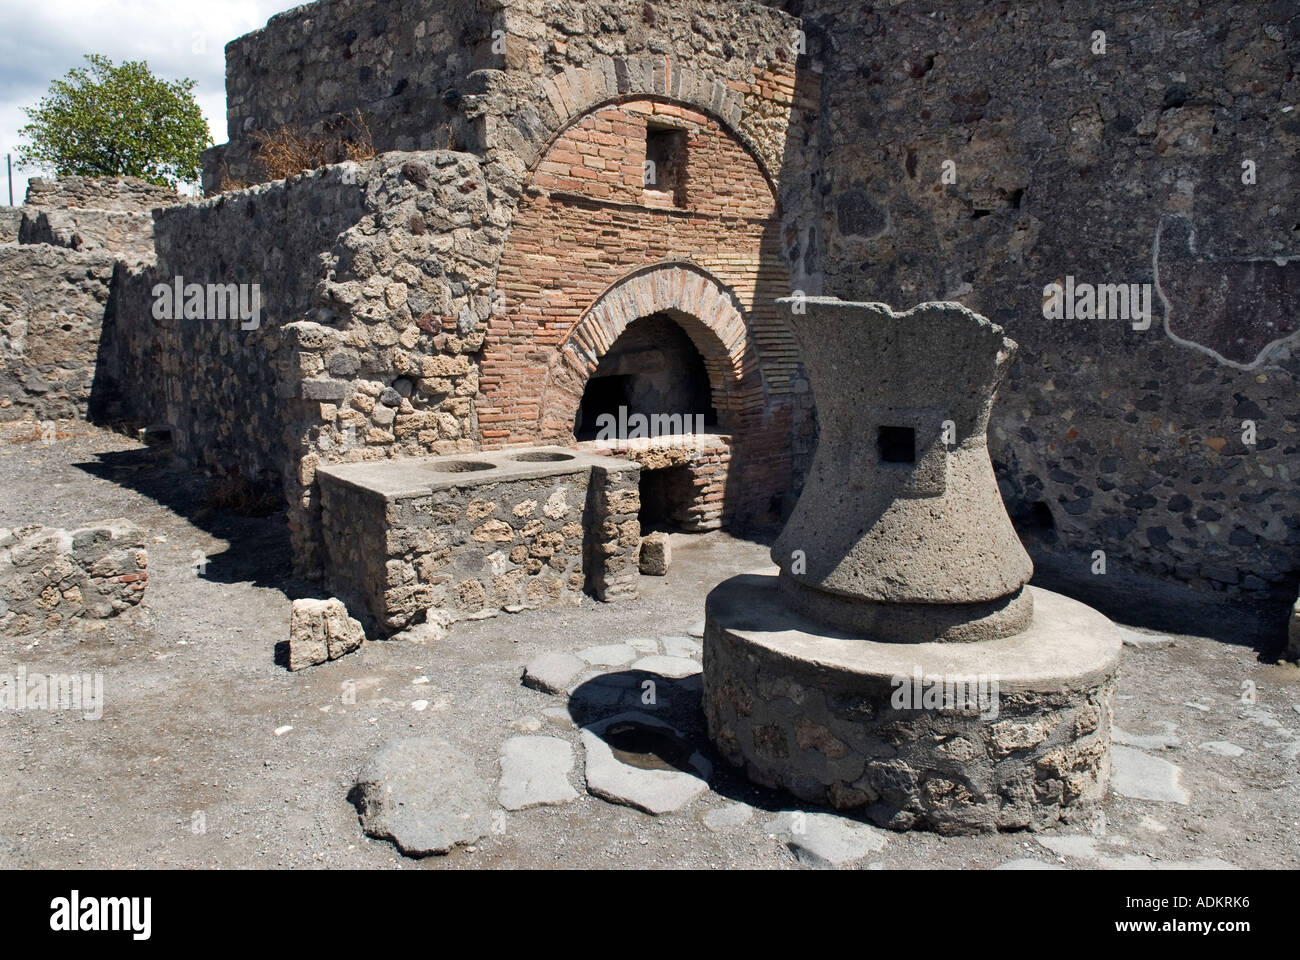 The excavations of the ruins of Pompeii, near Naples in Italy which was destroyed by the eruption of Vesuvius in  August 79 A.D. Stock Photo